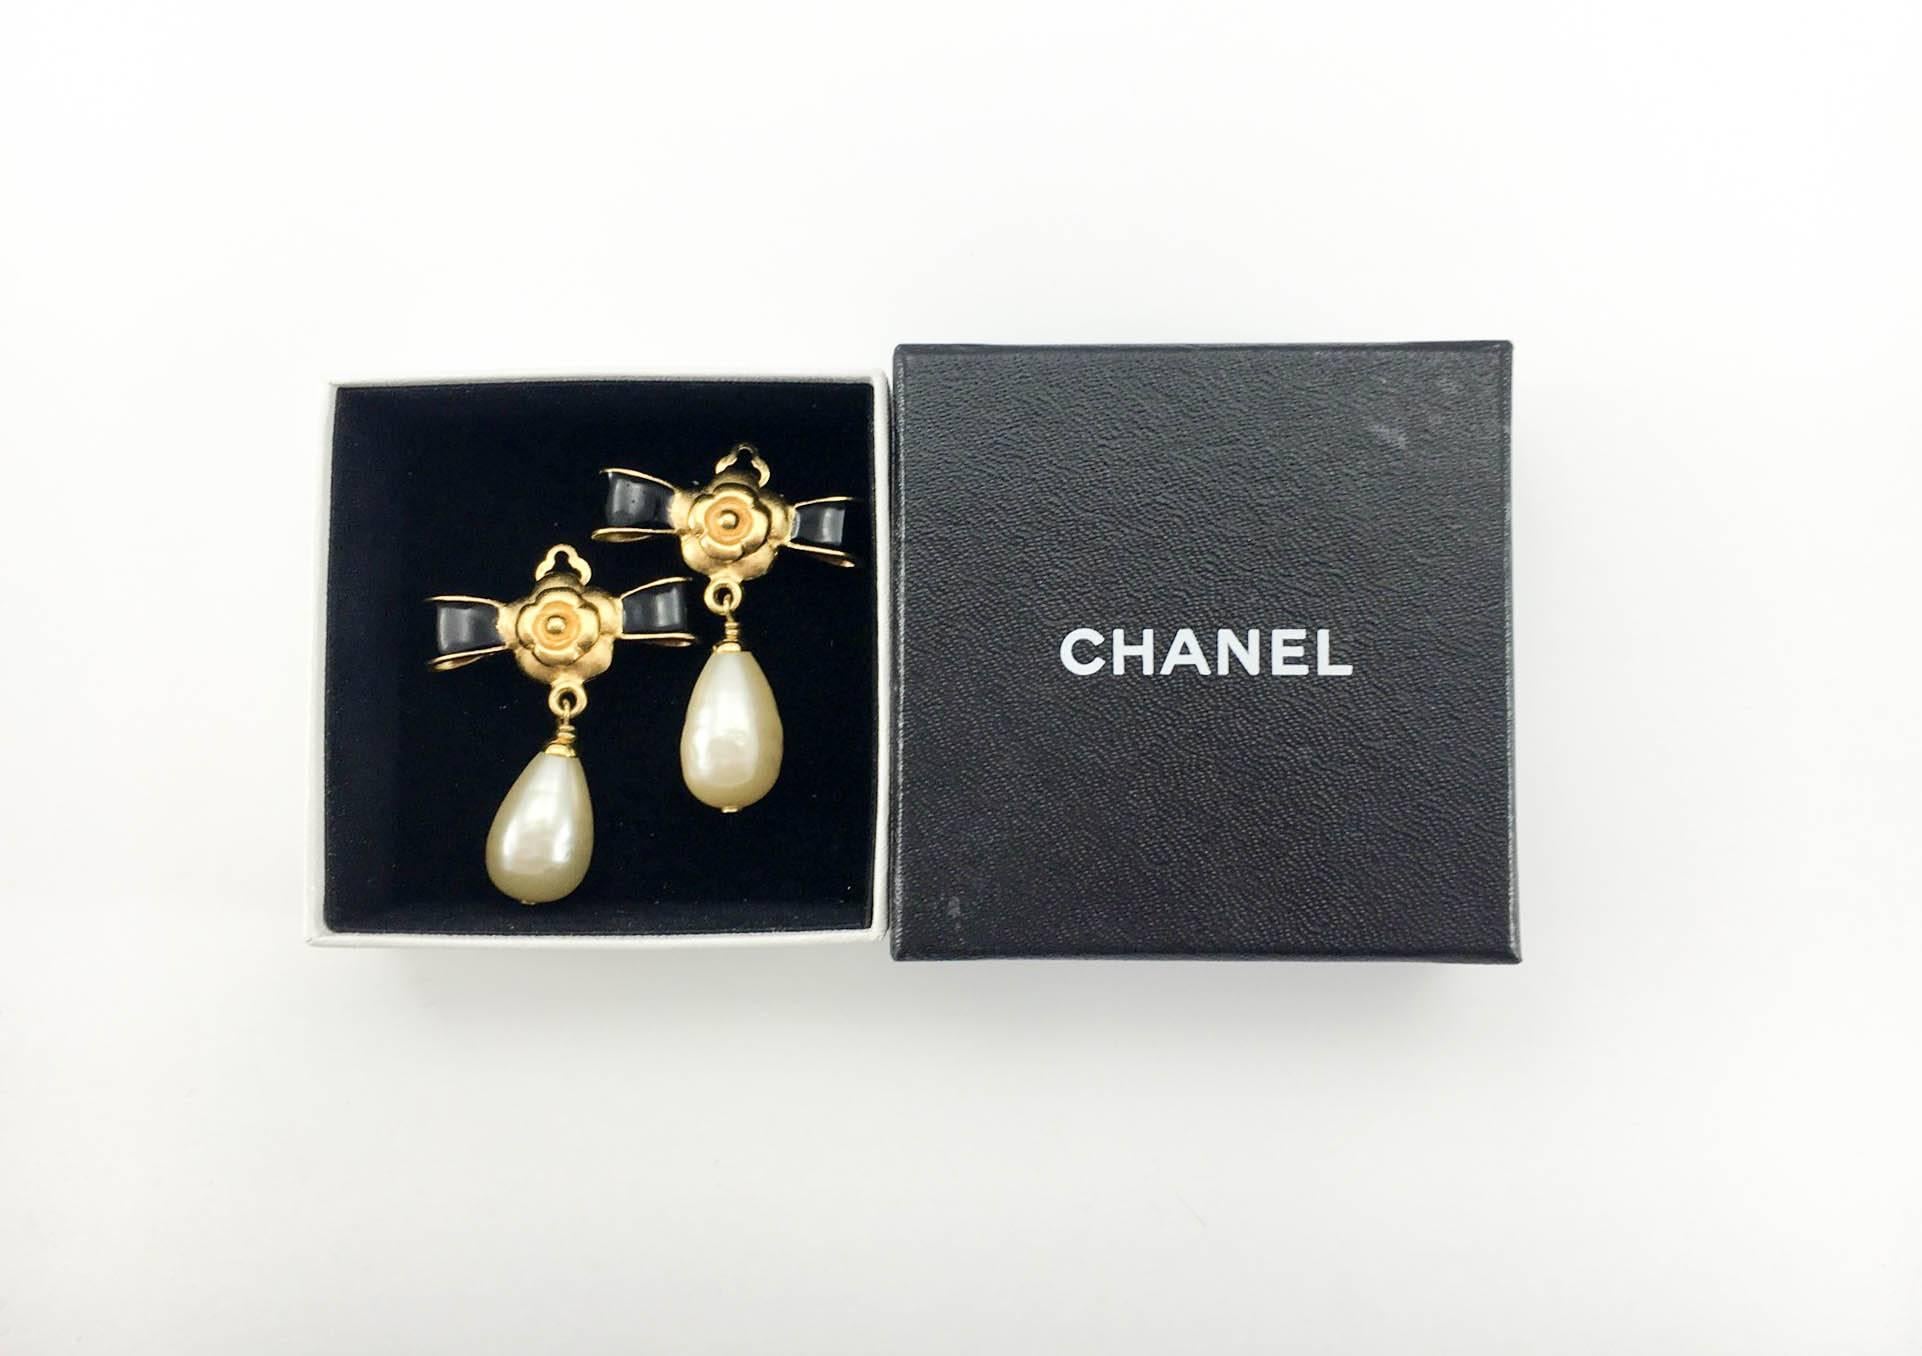 Chanel Gold-Plated Camellia, Enameled Black Bow and Pearl Drop Earrings - 1993 1